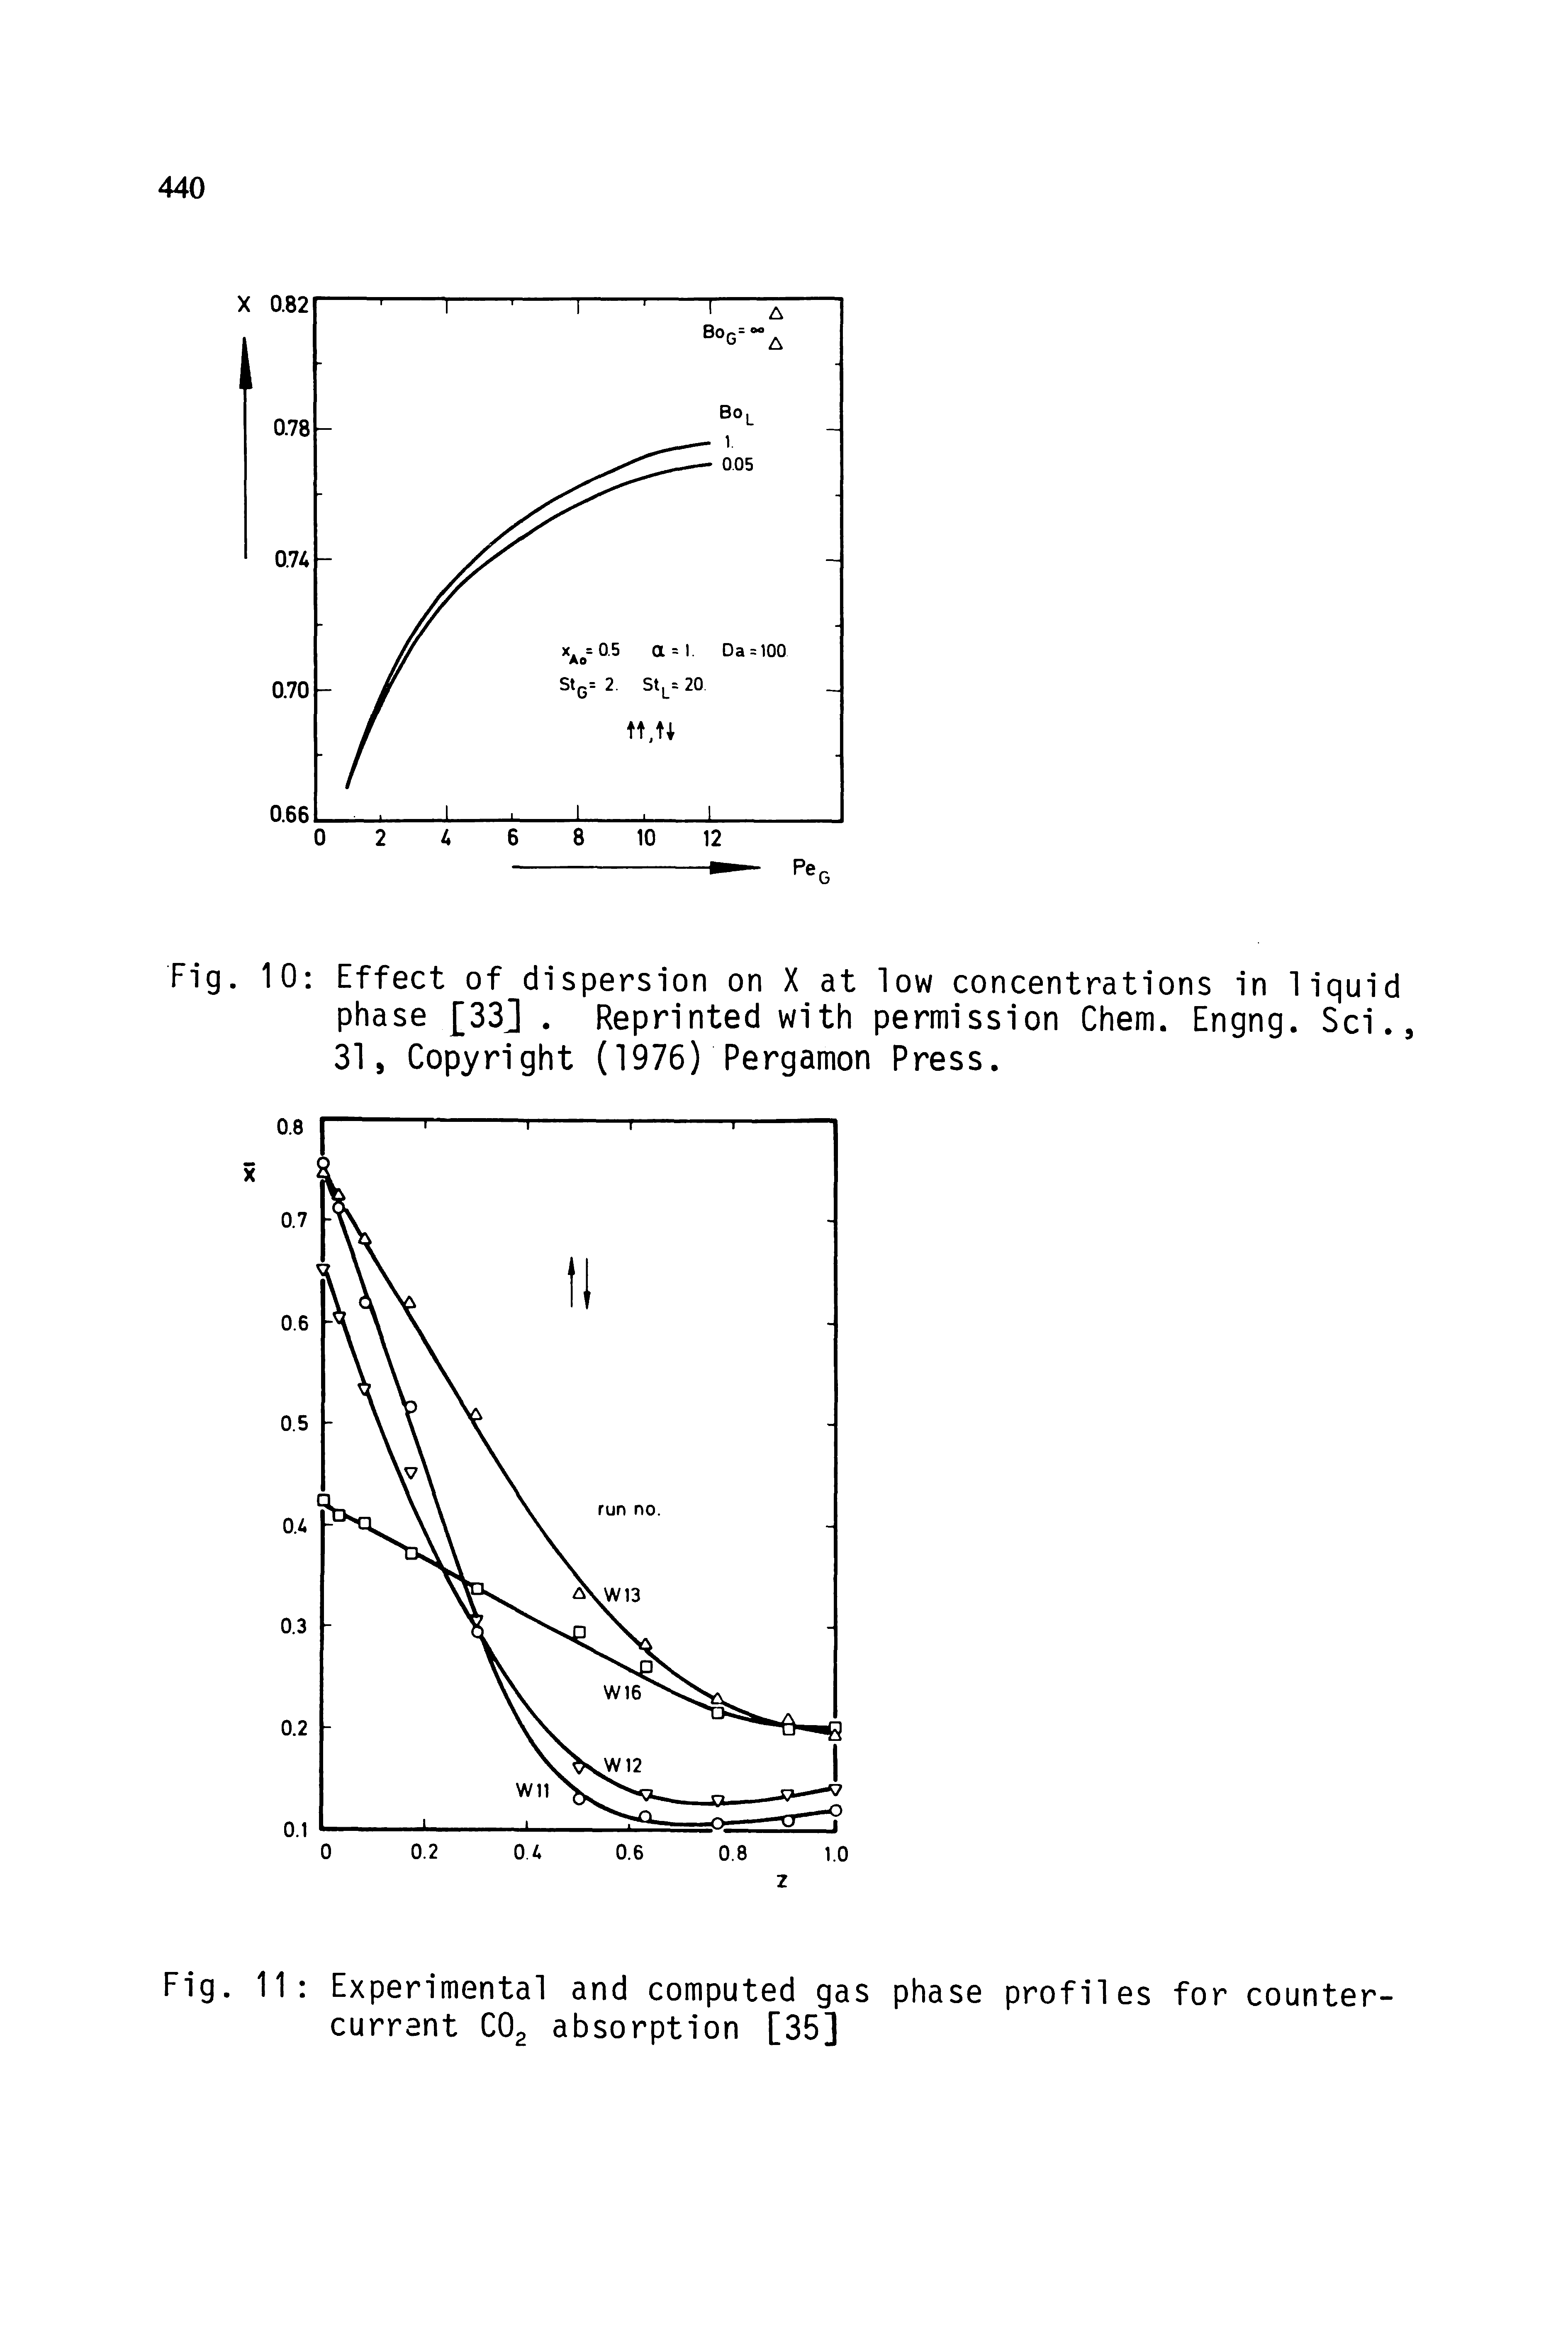 Fig. 10 Effect of dispersion on X at low concentrations in liquid phase 33j. Reprinted with permission Chem. Engng. Sci., 31, Copyright (1976) Pergamon Press.